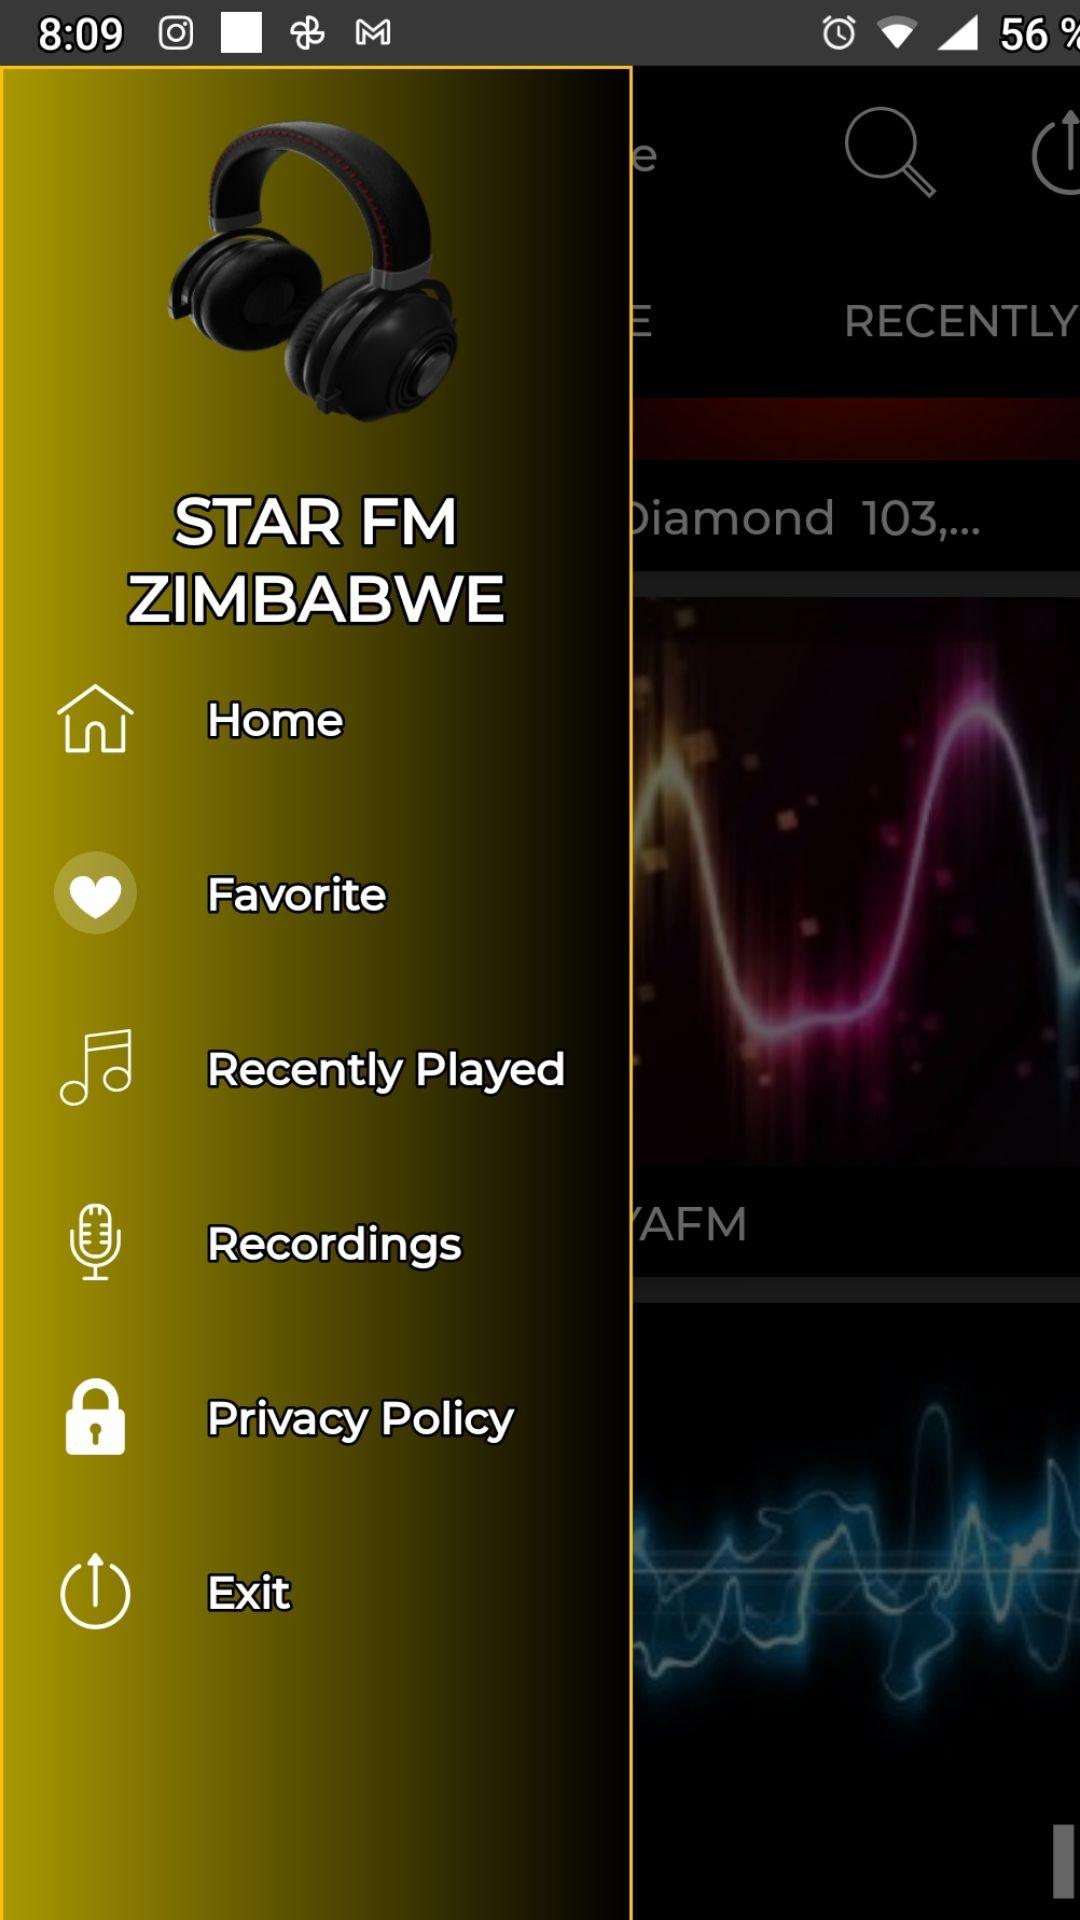 Star FM Zimbabwe - Radio app music free Online for Android - APK Download